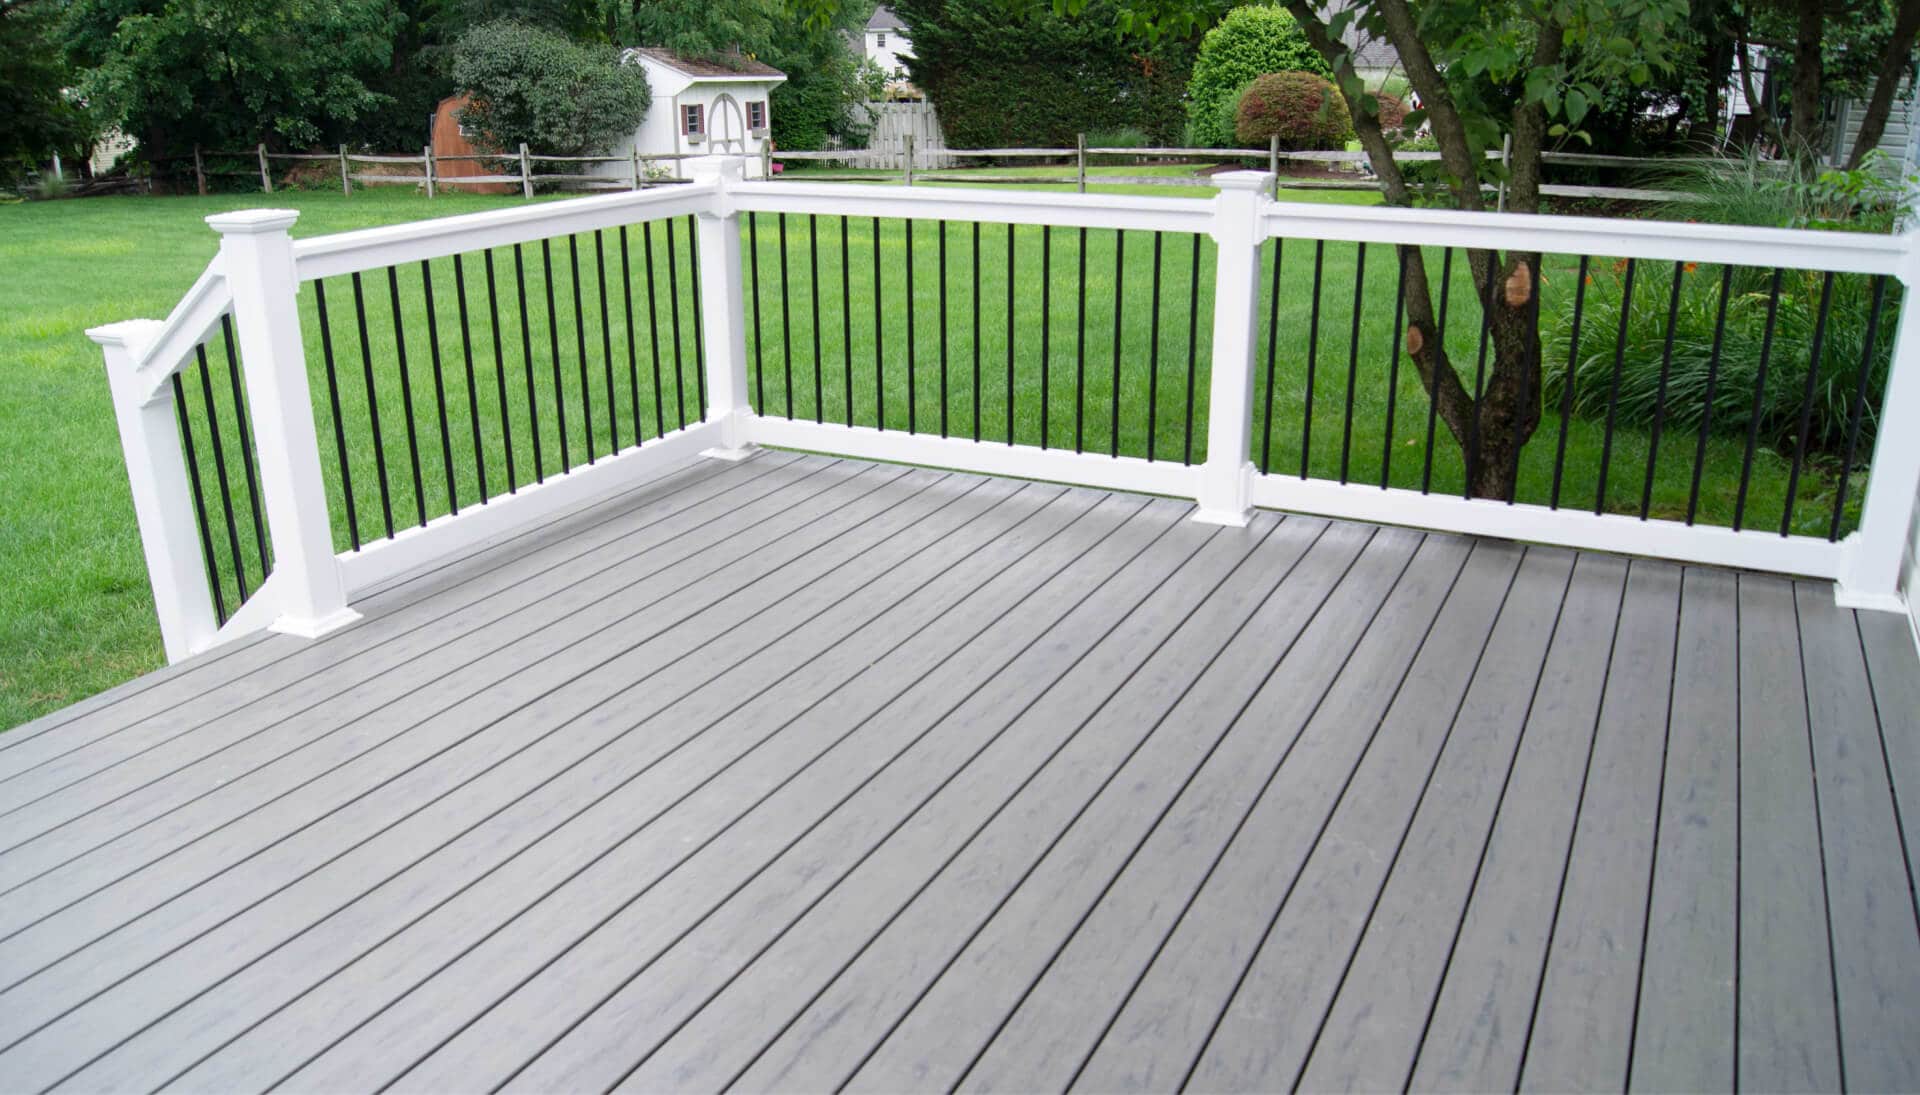 Deck Builders in Columbia, MD: Add Value to Your Home with Our Railing and Covers